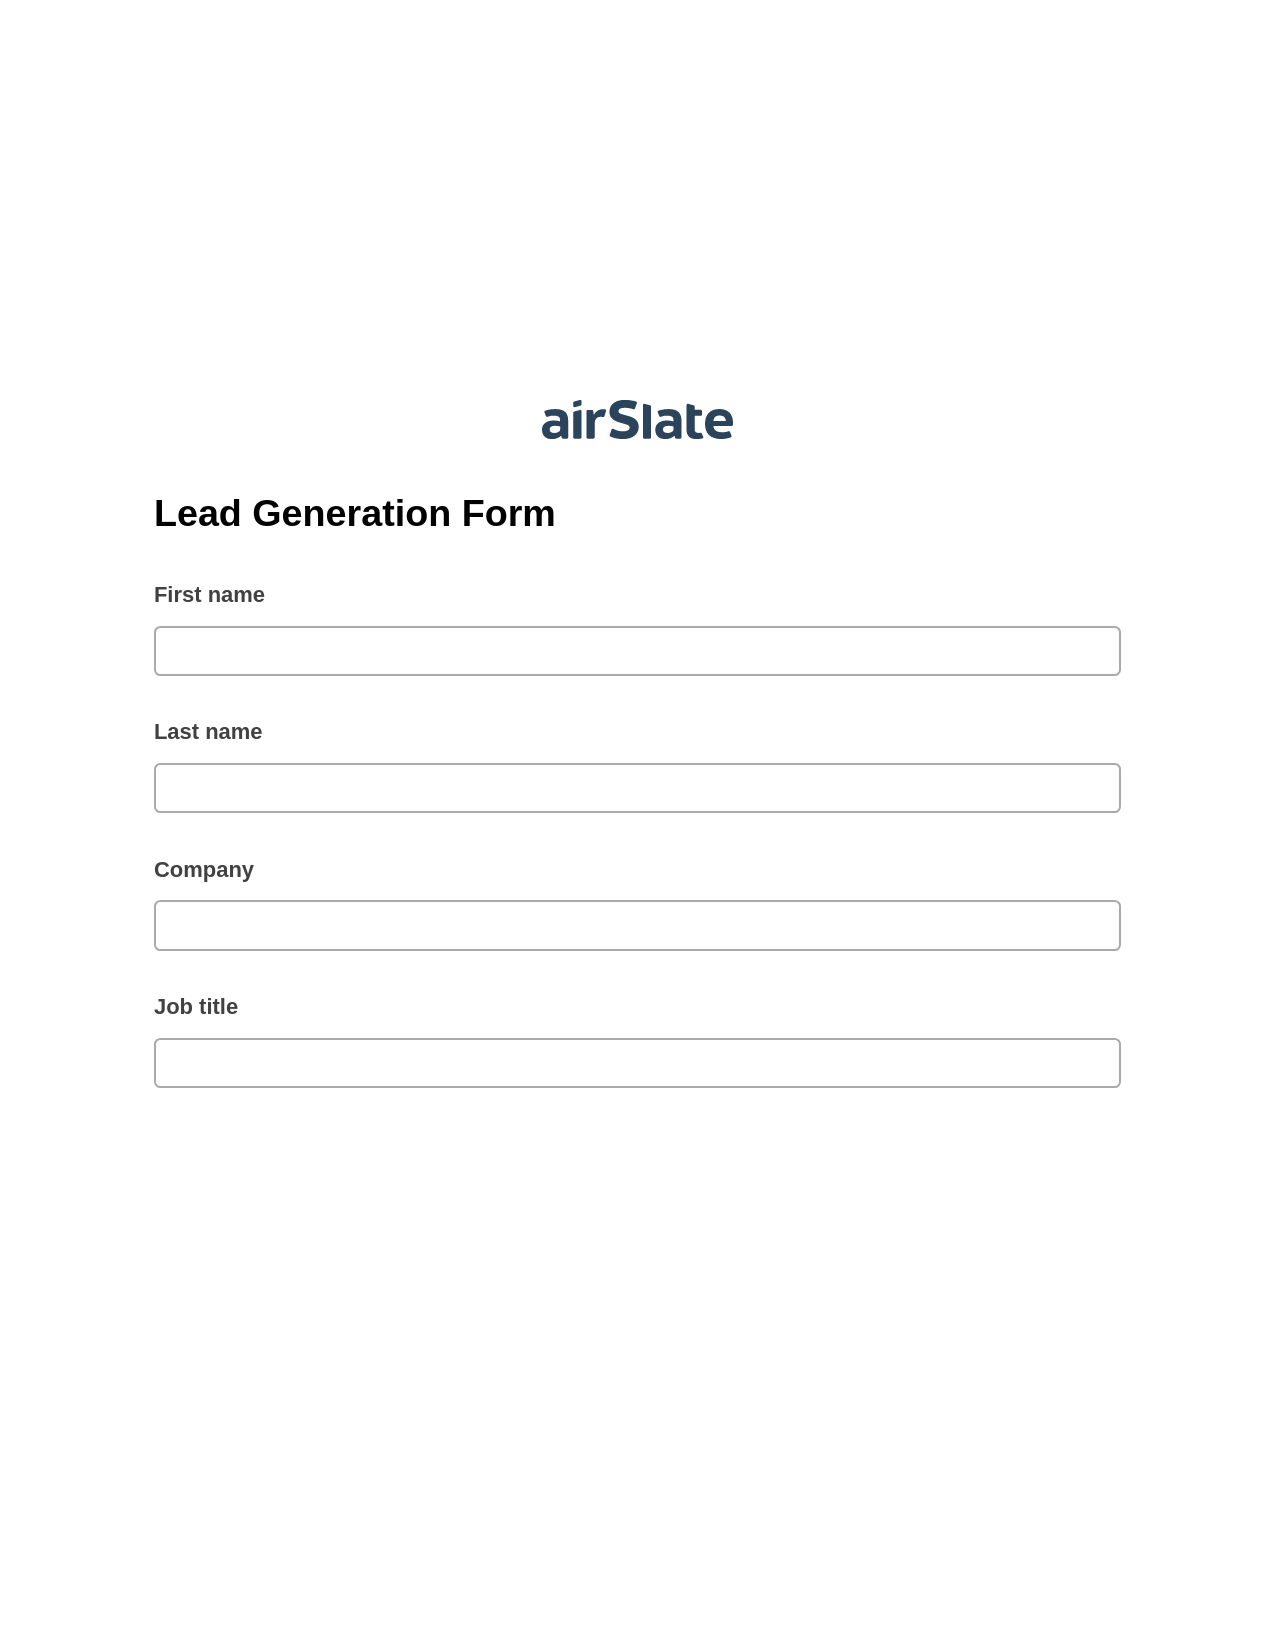 Lead Generation Form Pre-fill from CSV File Bot, Send a Slate with Roles Bot, Webhook Postfinish Bot